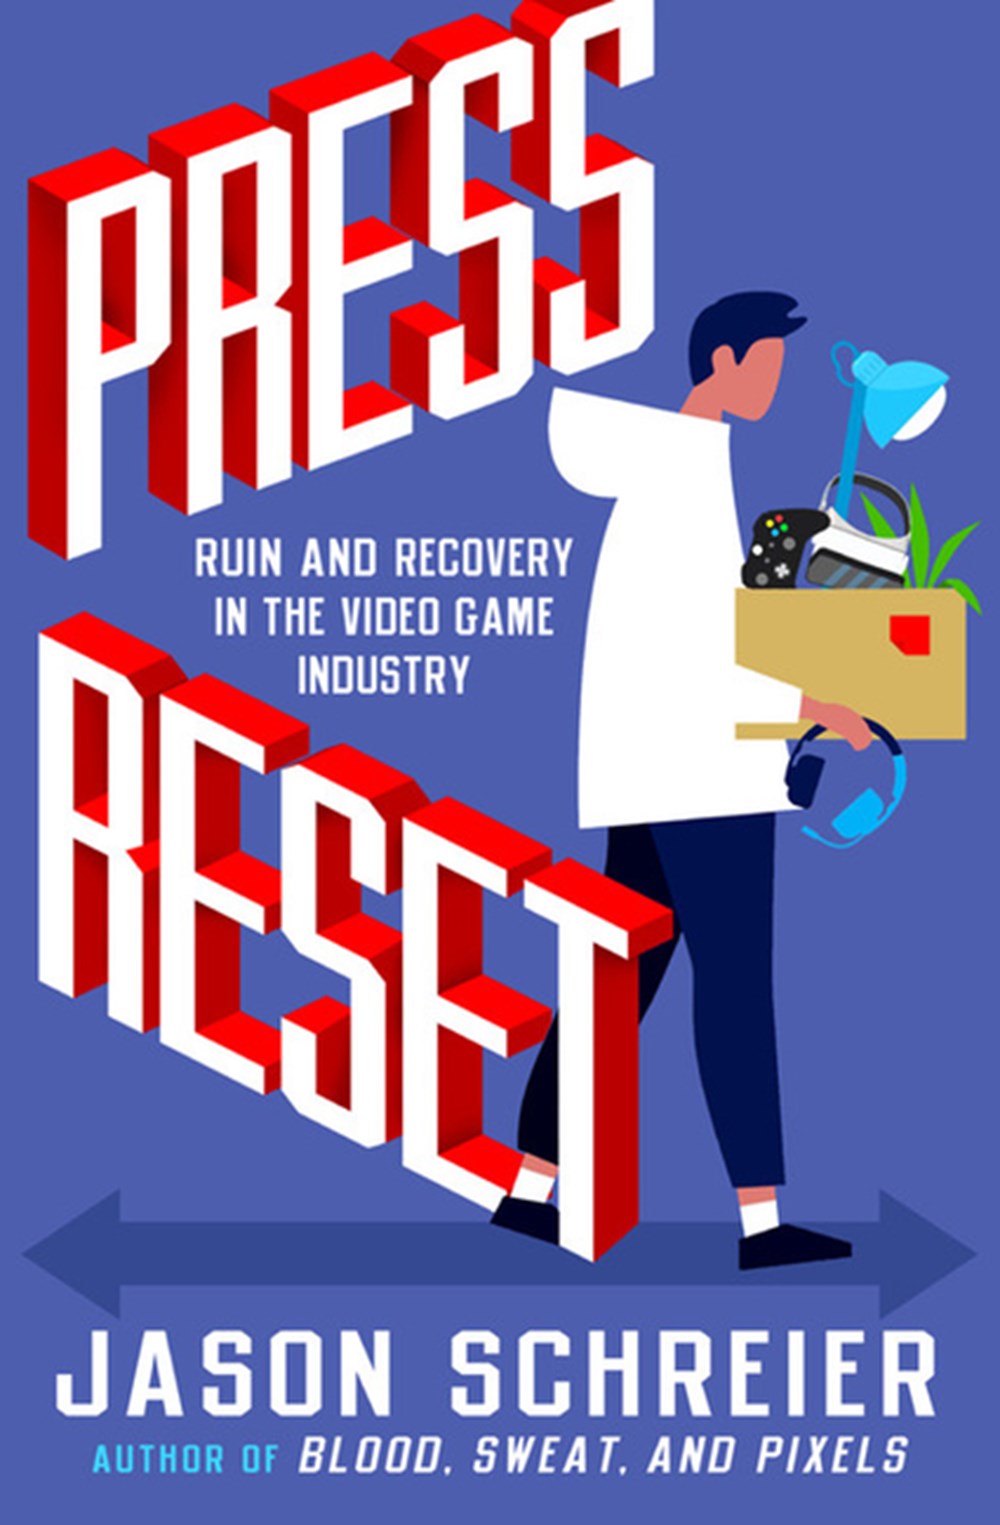 Press Reset Ruin and Recovery in the Video Game Industry